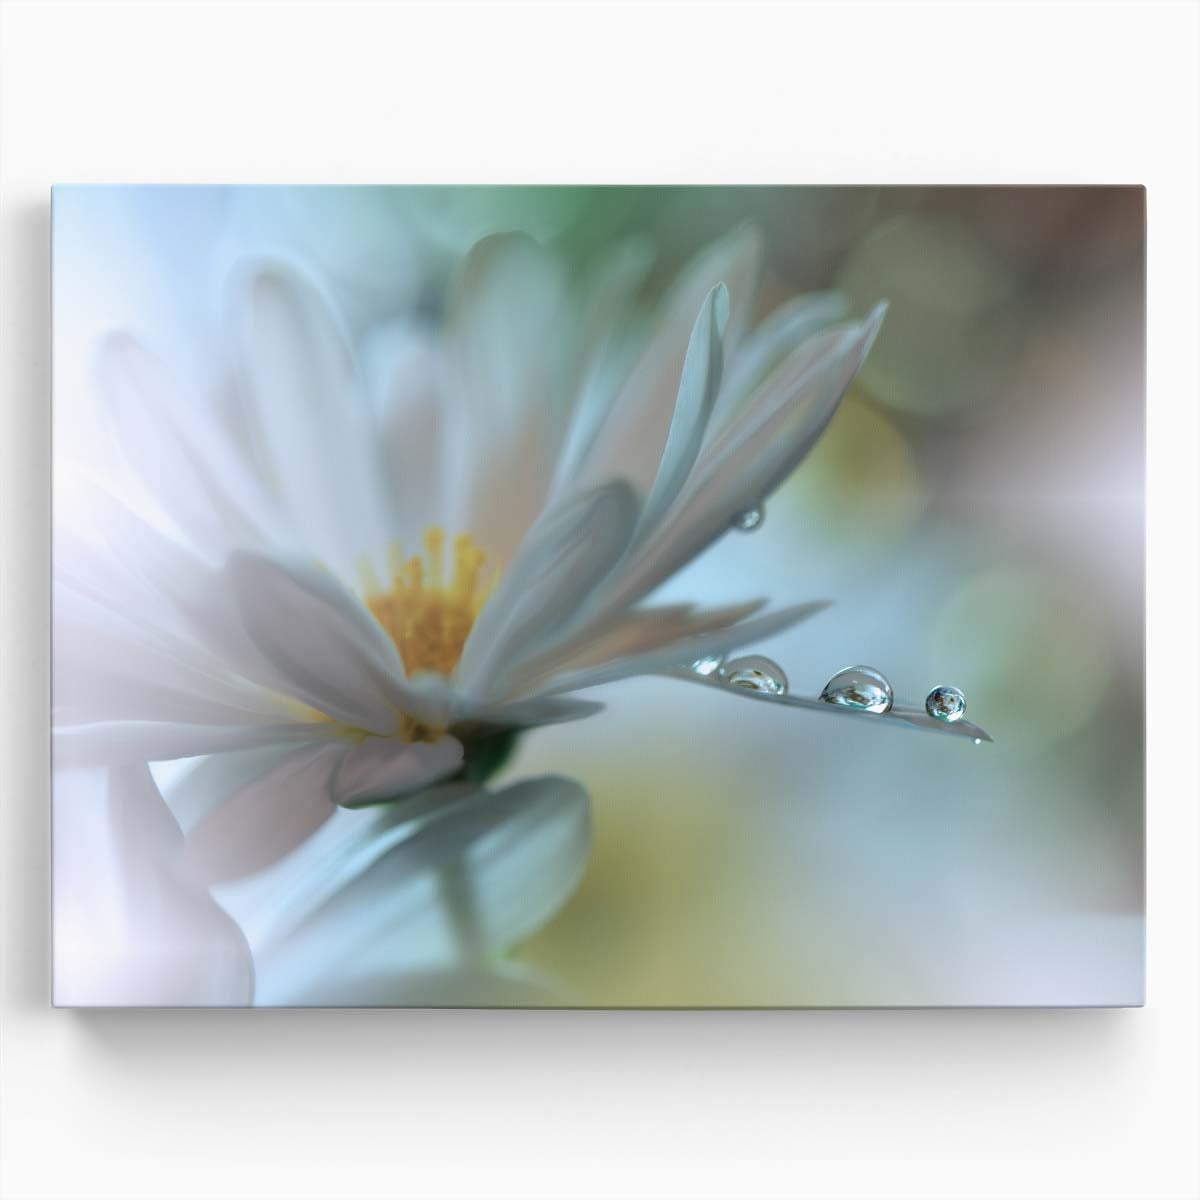 Delicate Daisy & Water Droplets Macro Photography Wall Art by Luxuriance Designs. Made in USA.